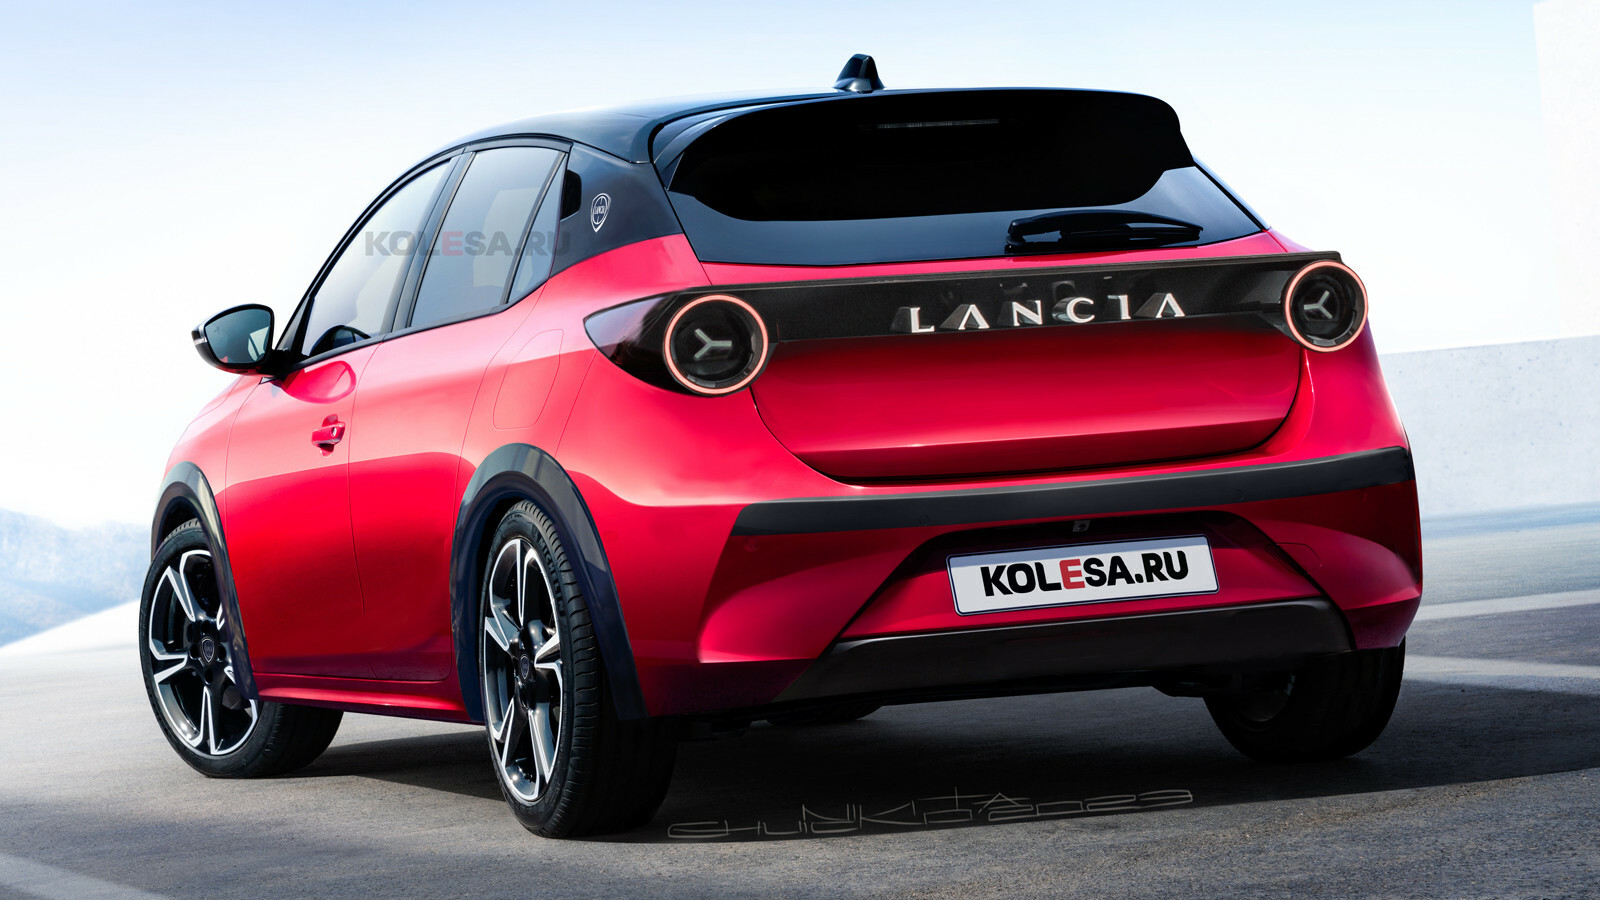 2025 Lancia Ypsilon Render Gives Us An Early Look At Electric